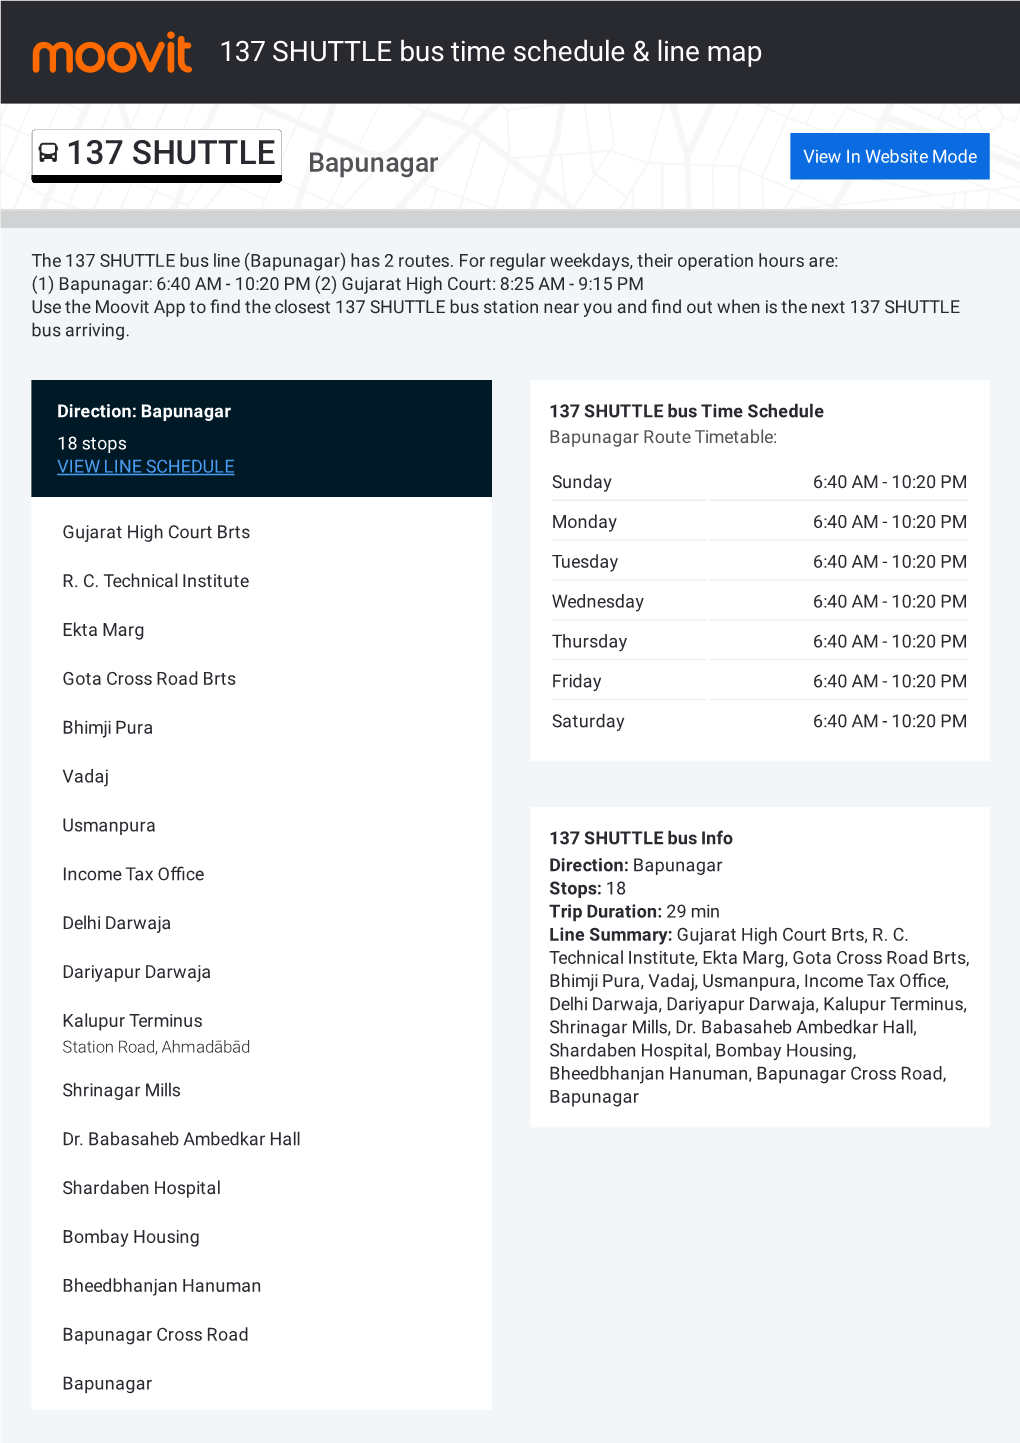 137 SHUTTLE Bus Time Schedule & Line Route